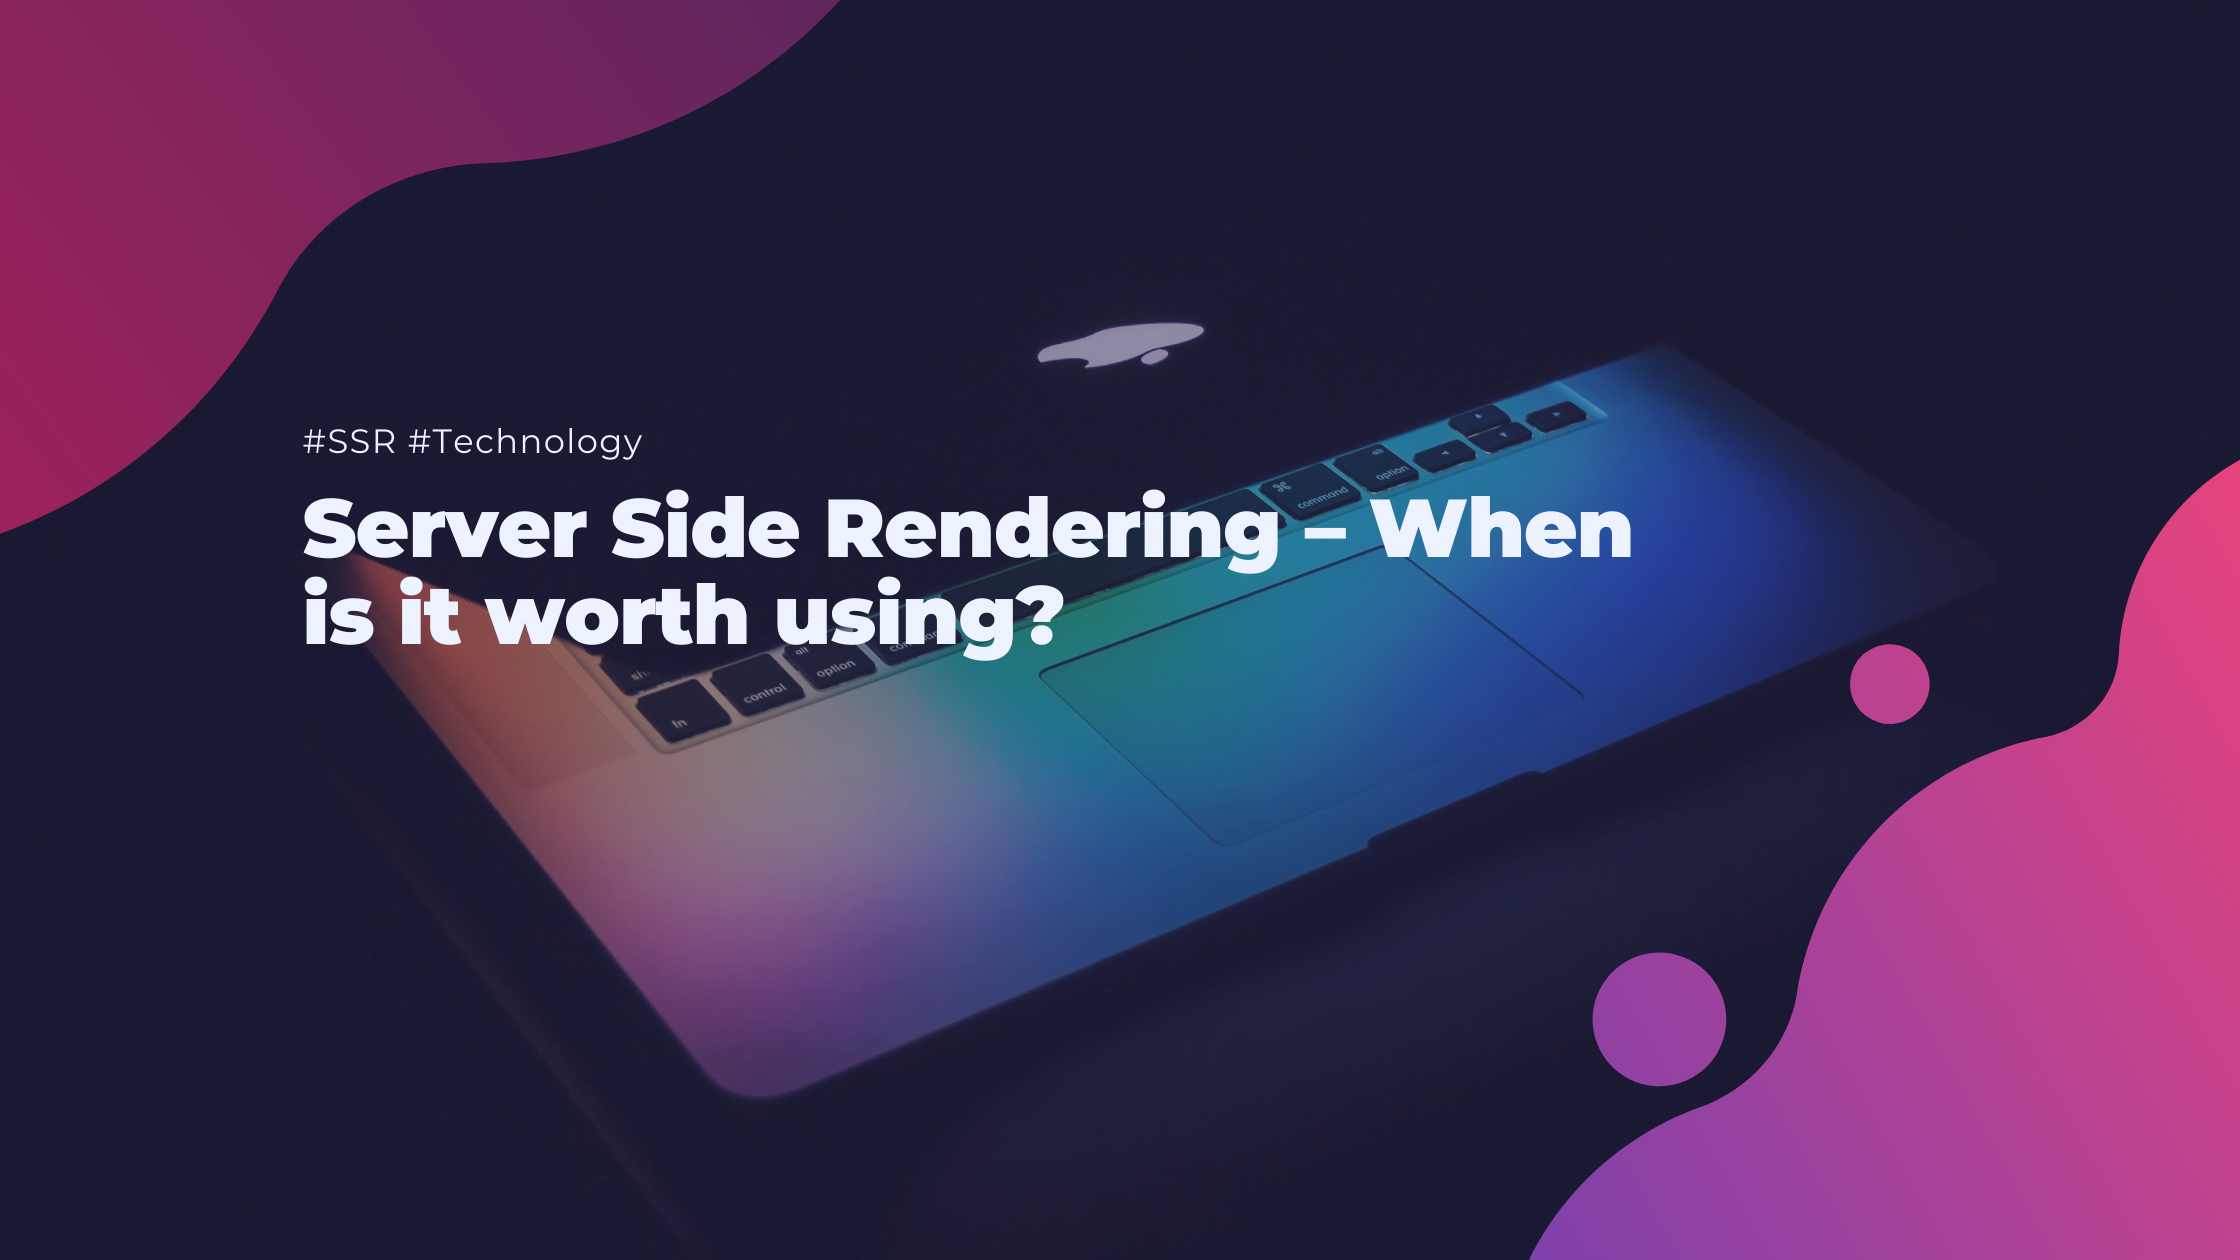 Server Side Rendering – When is it worth using?